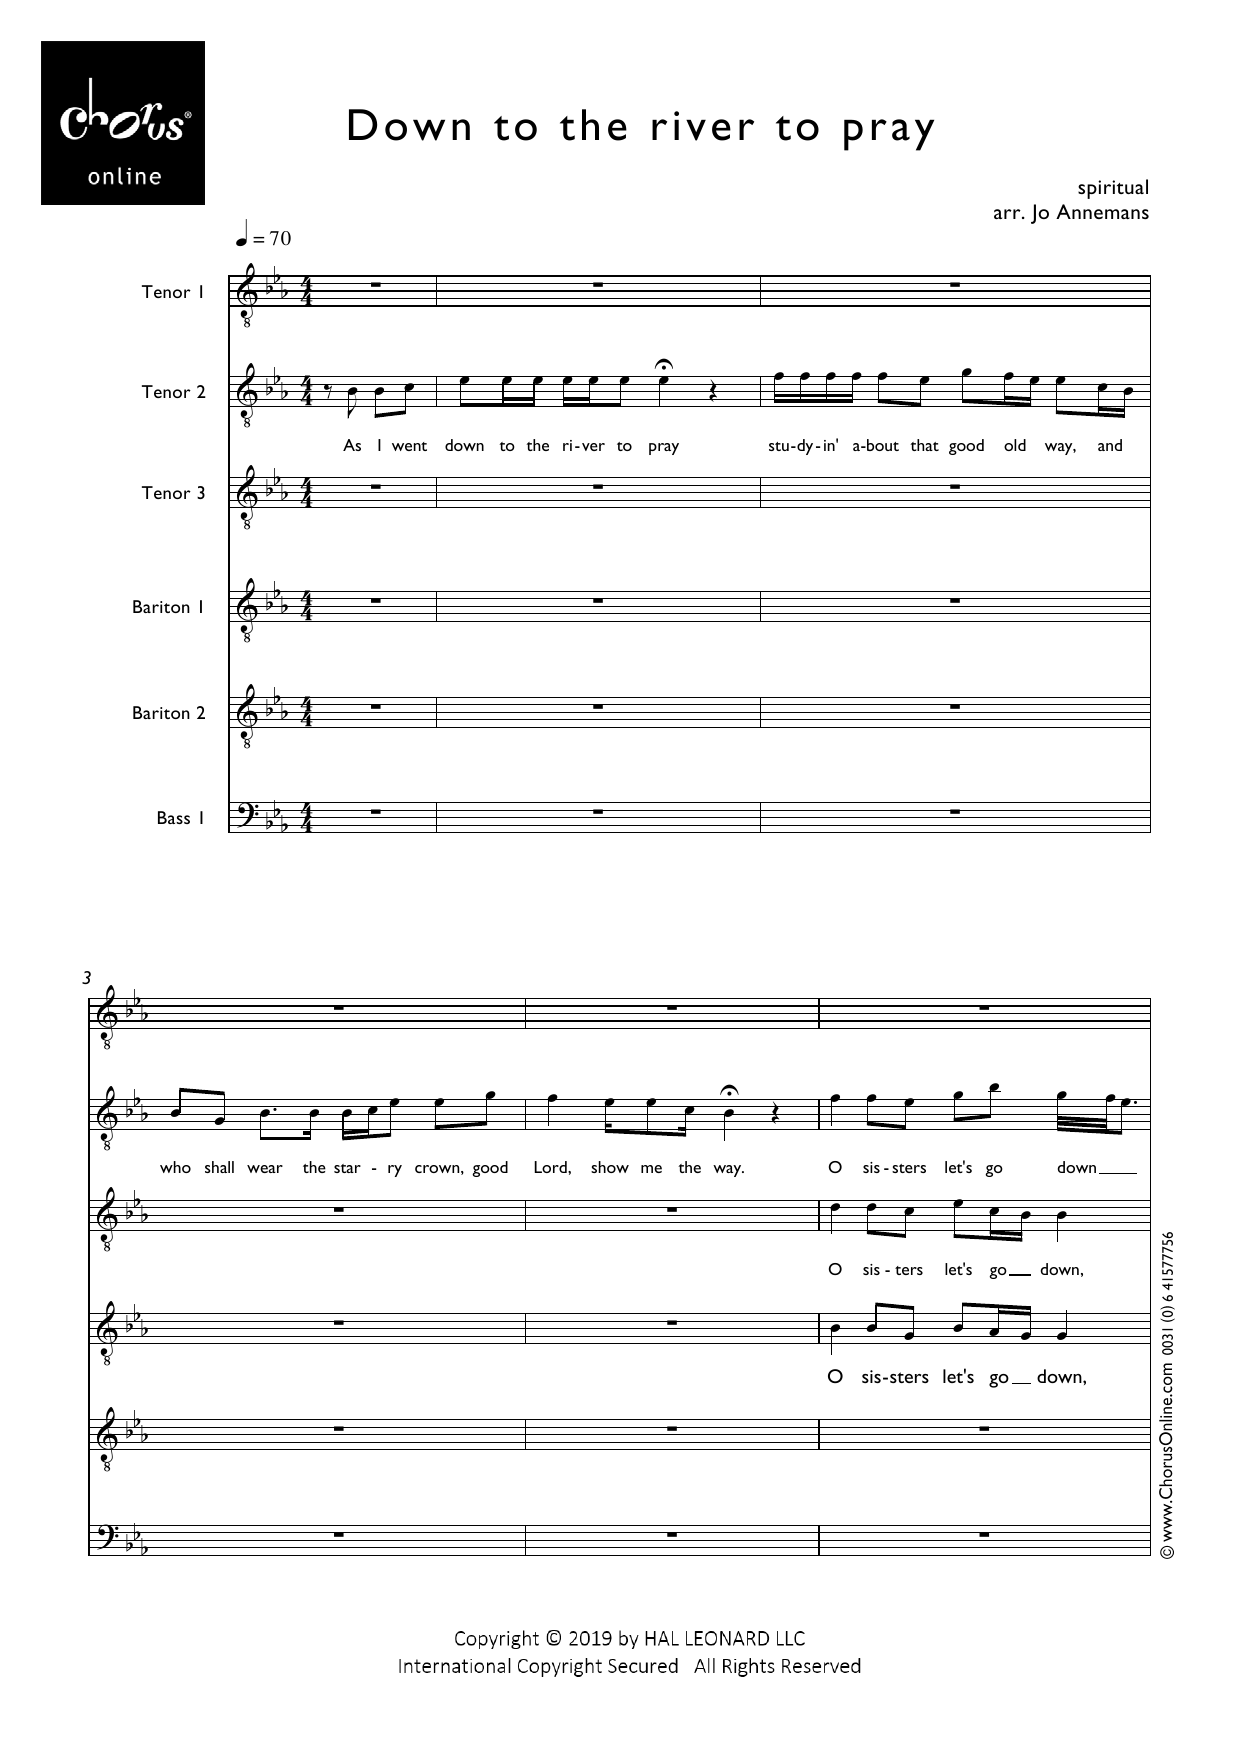 Voice Male Down to the River to Pray (arr. Jo Annemans) sheet music notes printable PDF score